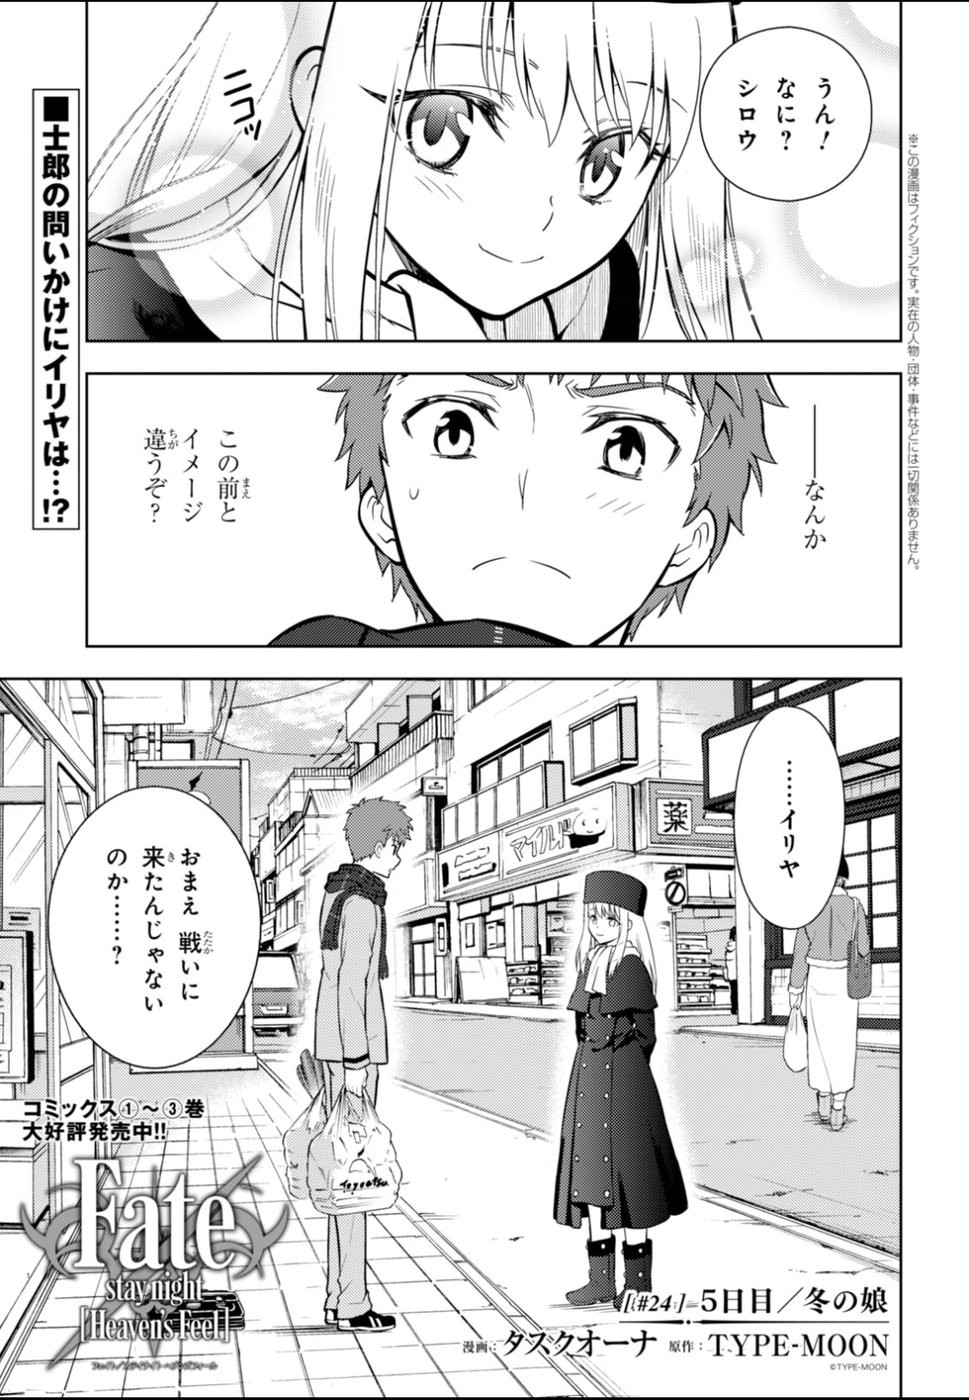 Fate/Stay night Heaven's Feel - Chapter 24 - Page 1